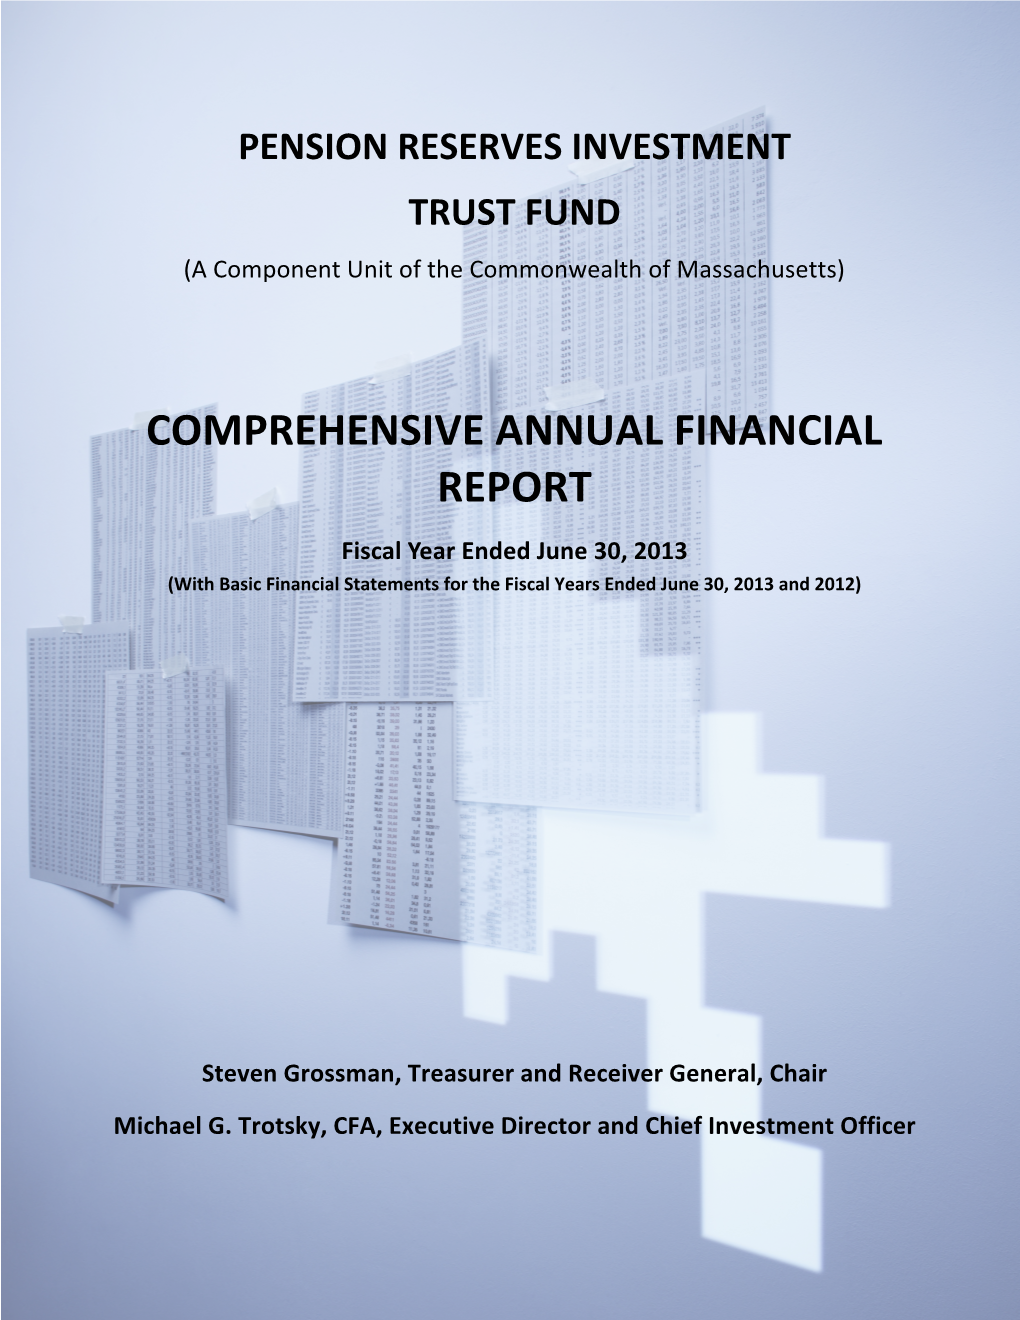 COMPREHENSIVE ANNUAL FINANCIAL REPORT for the Year Ended June 30, 2013